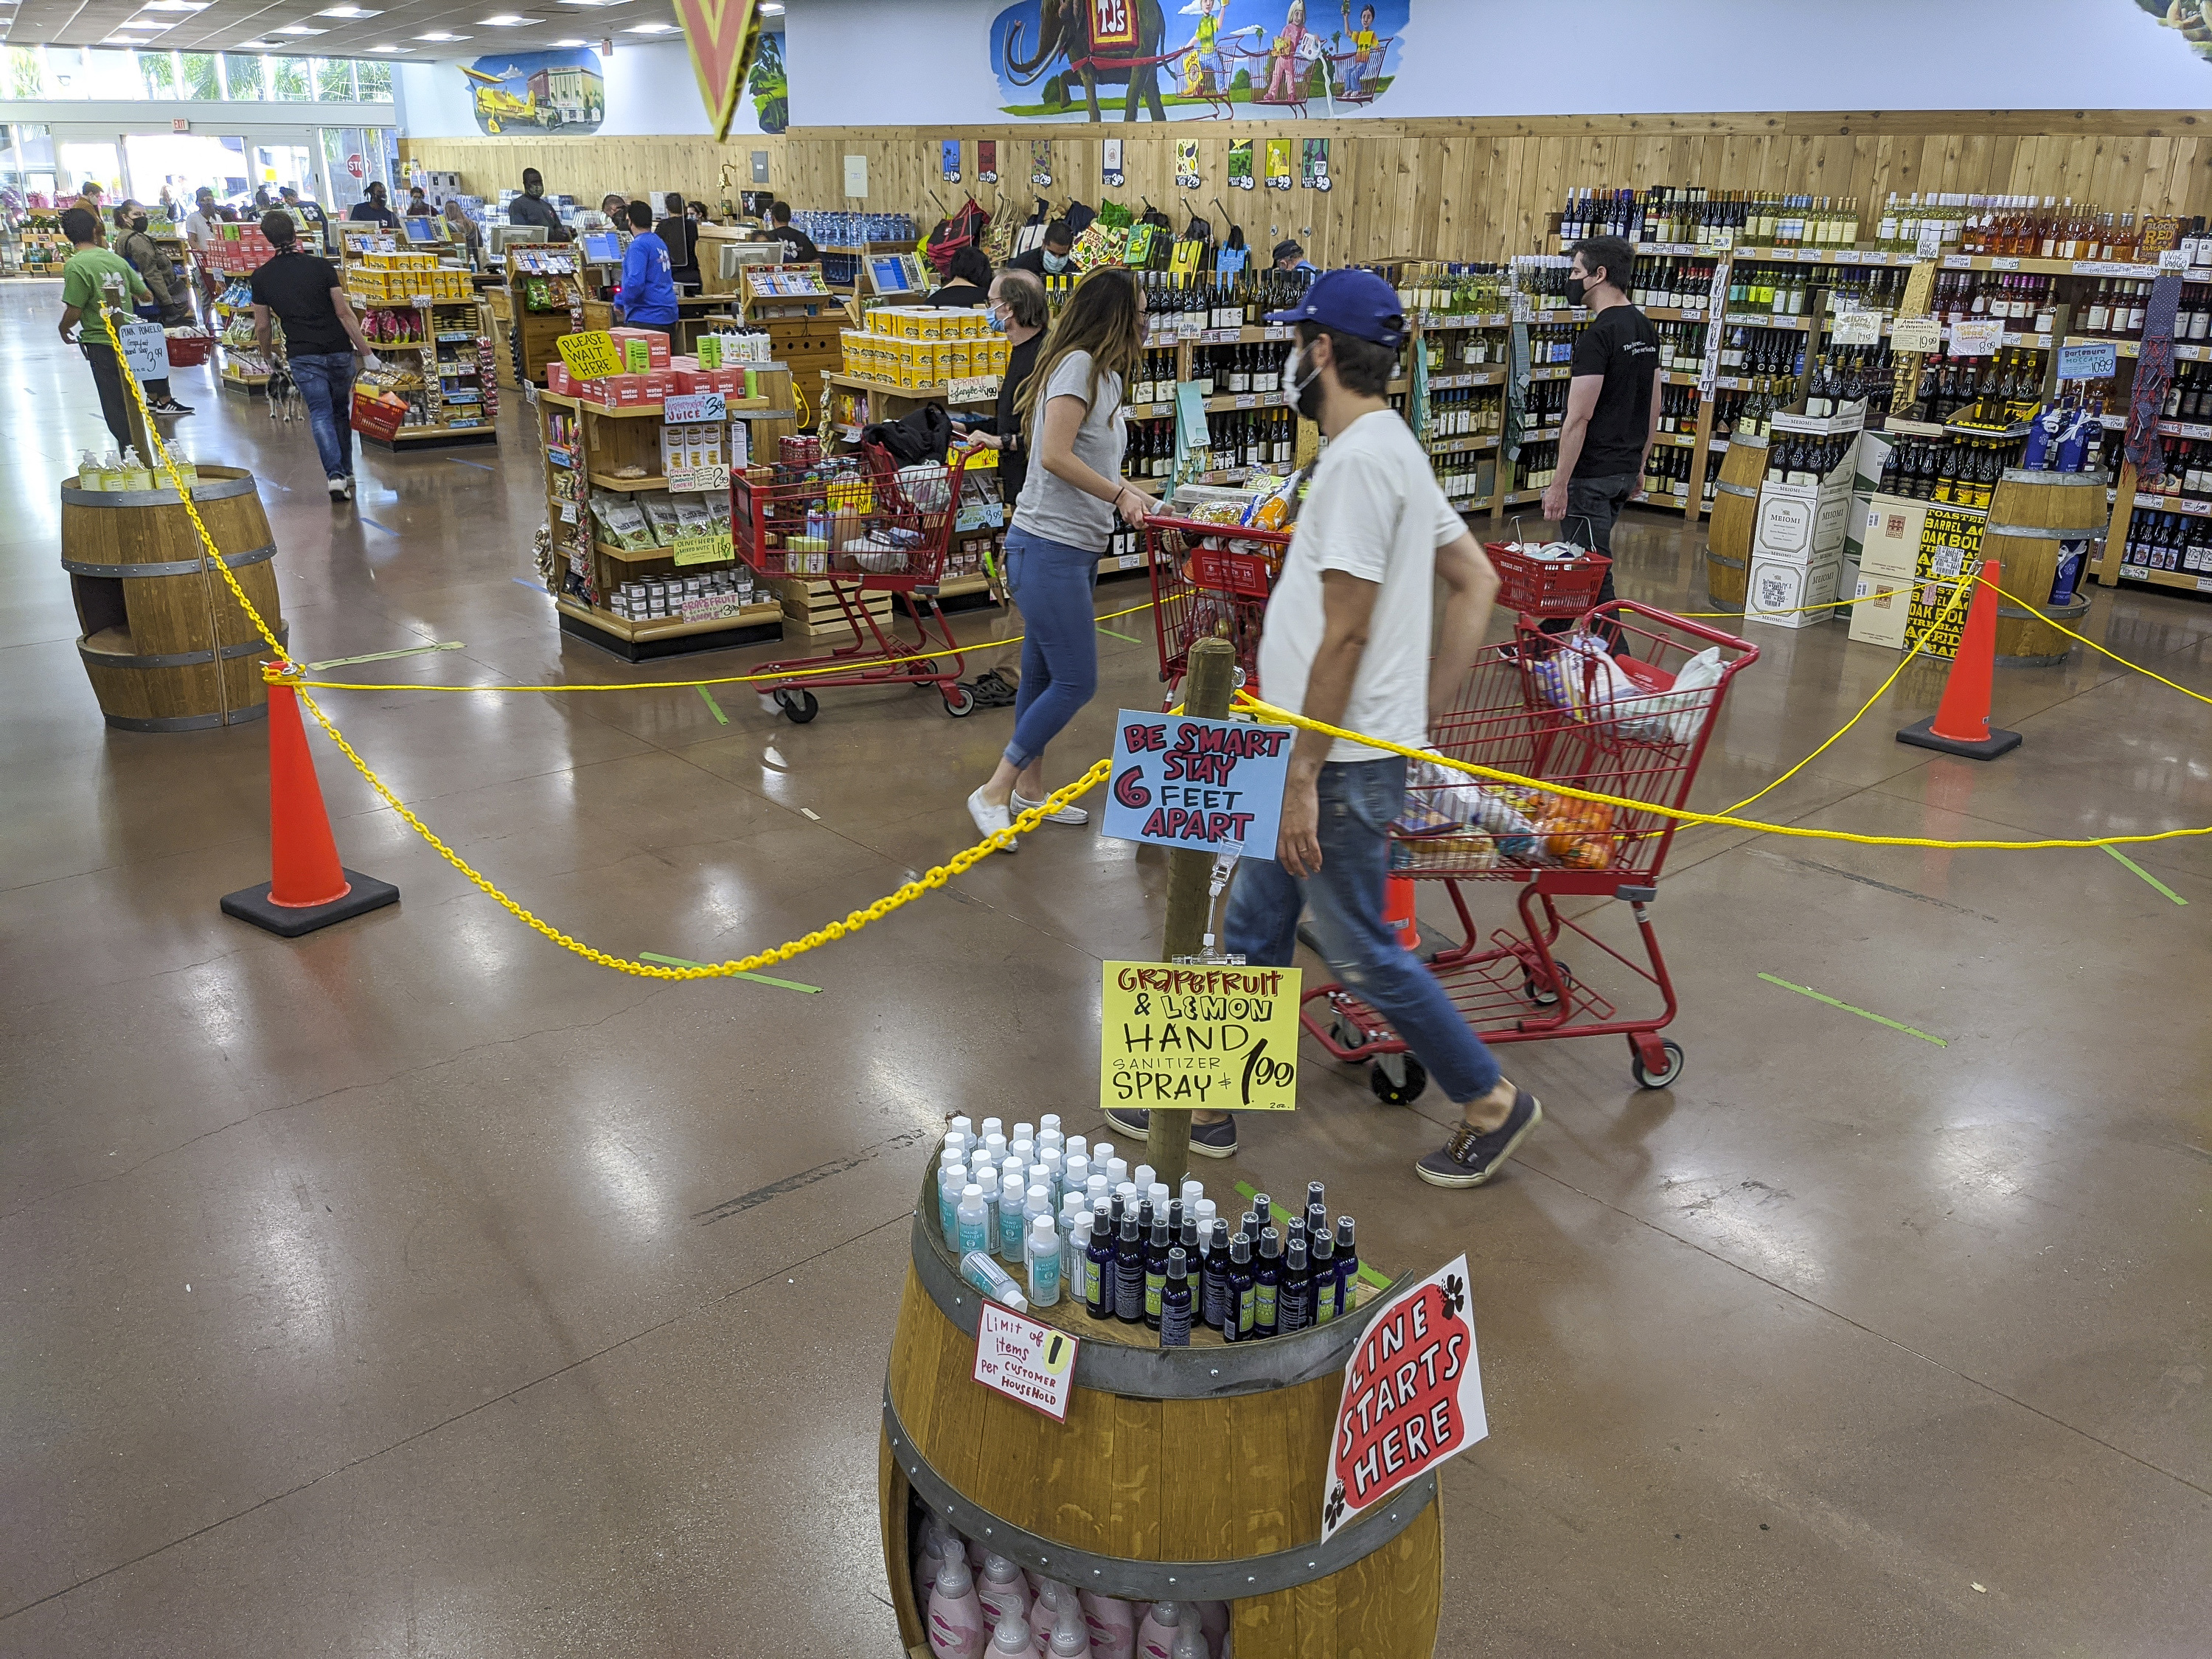 Customers wear protective masks and follow social distancing guidelines as they shop at a Trader Joe's in Los Angeles on May 14.